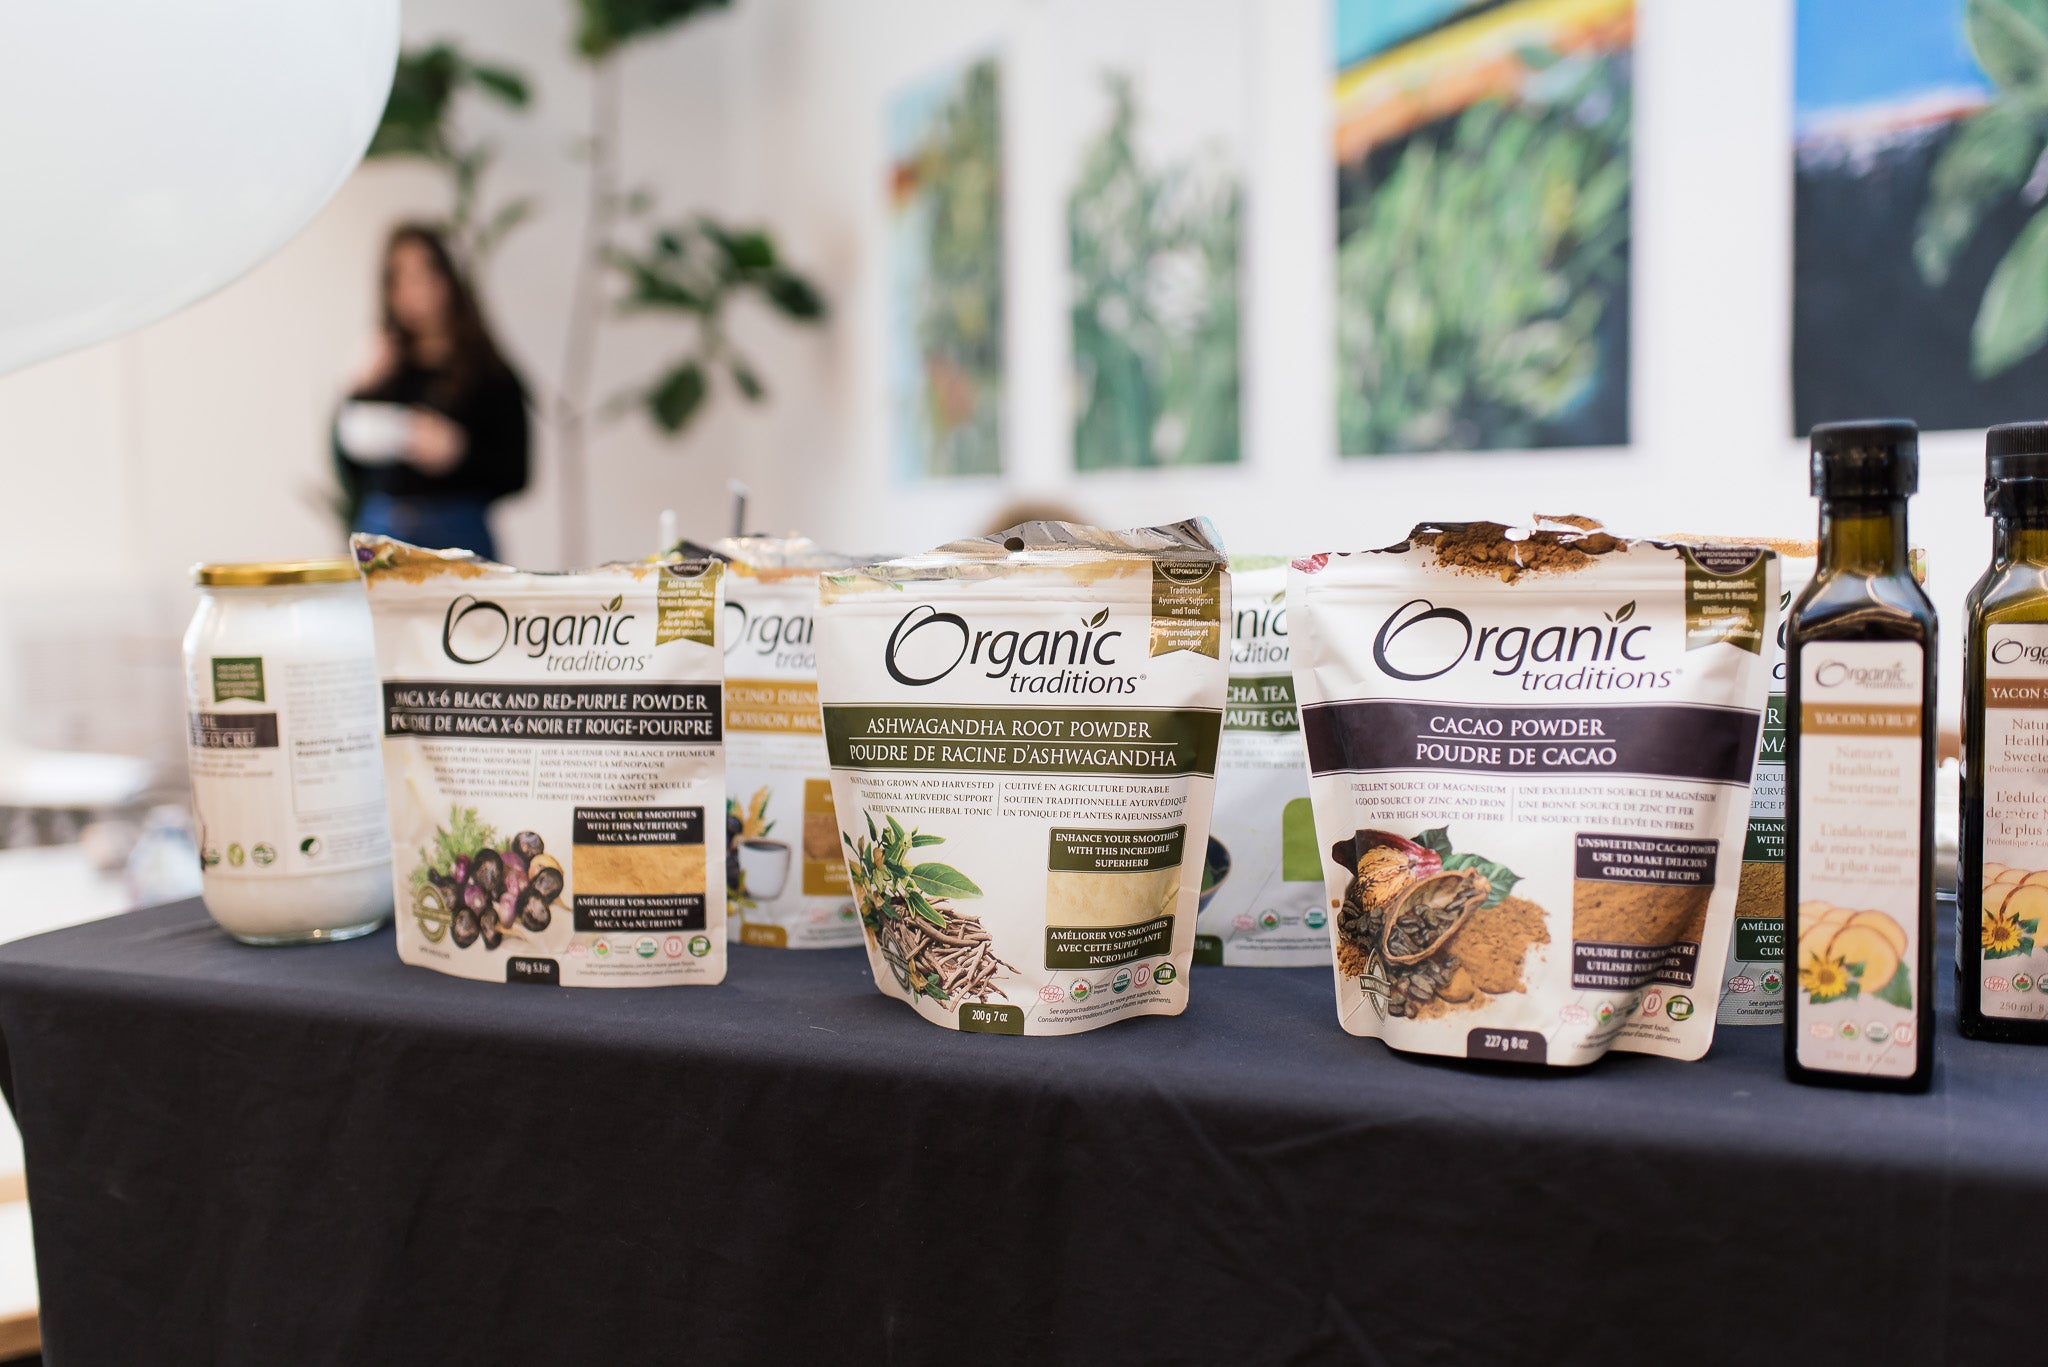 superfood blends and powders by Organic Traditions